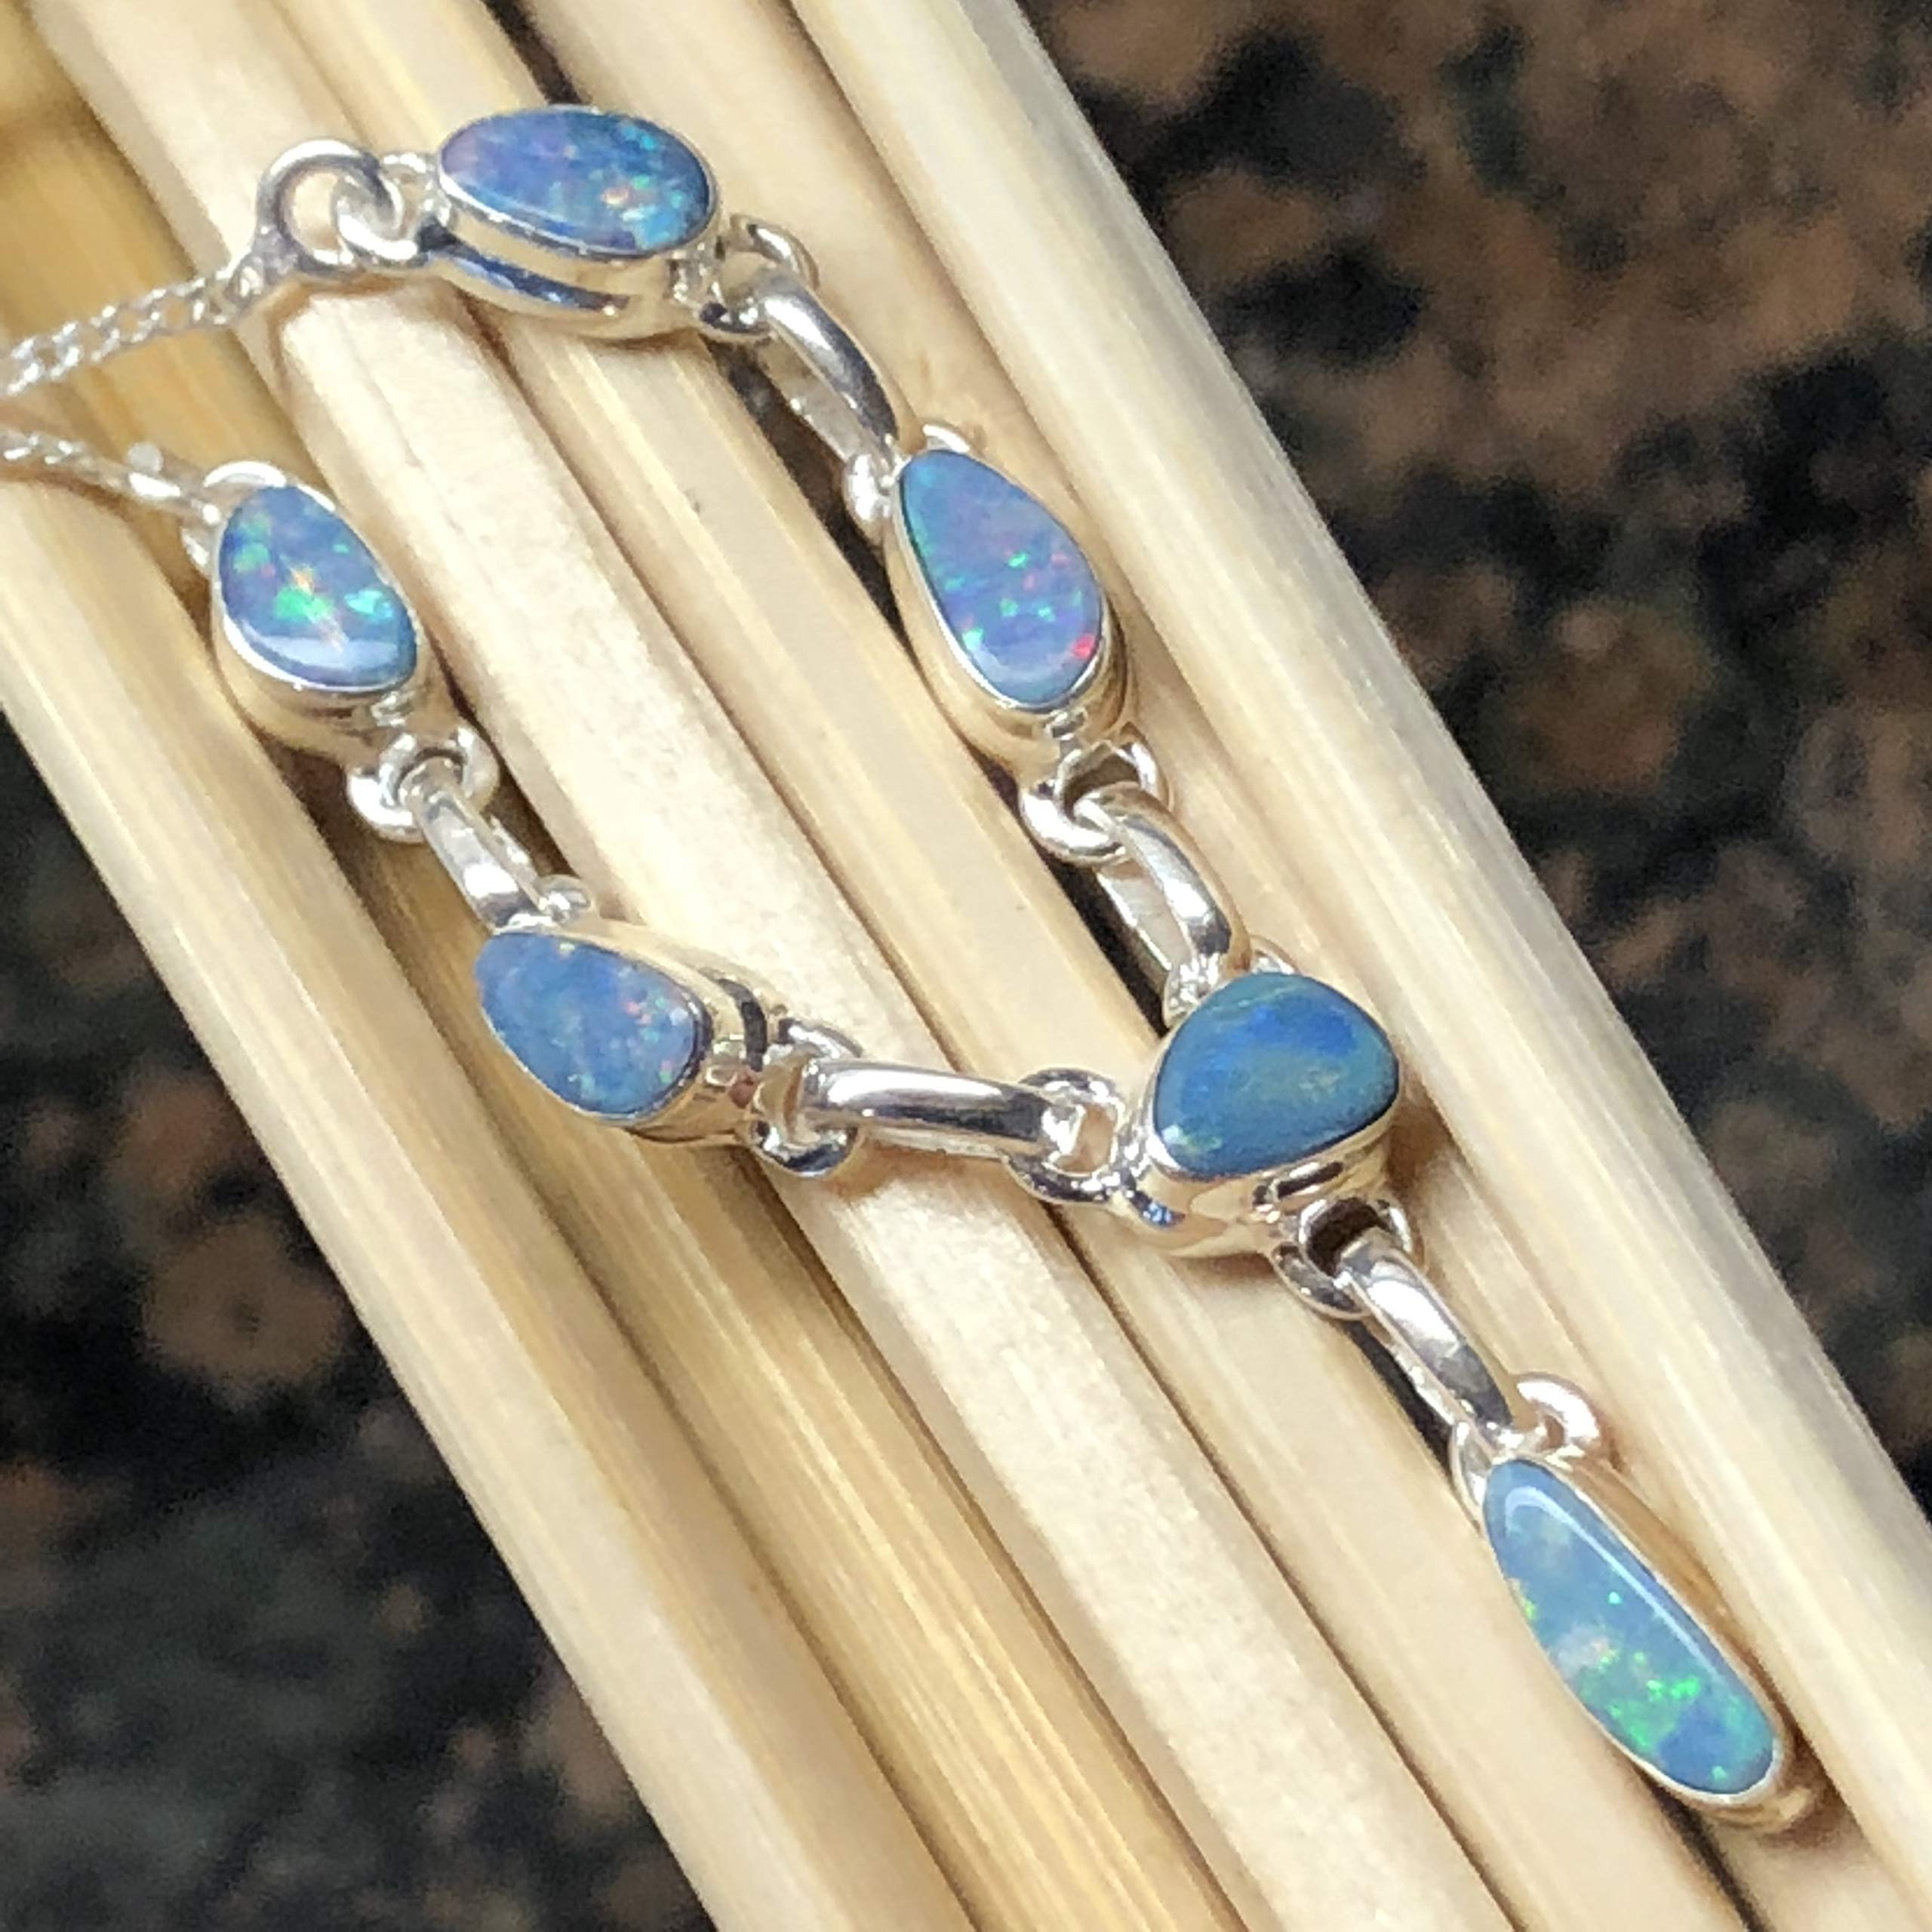 Genuine Australian Blue and Green Opal 925 Solid Sterling Silver Necklace 17" inches - Natural Rocks by Kala